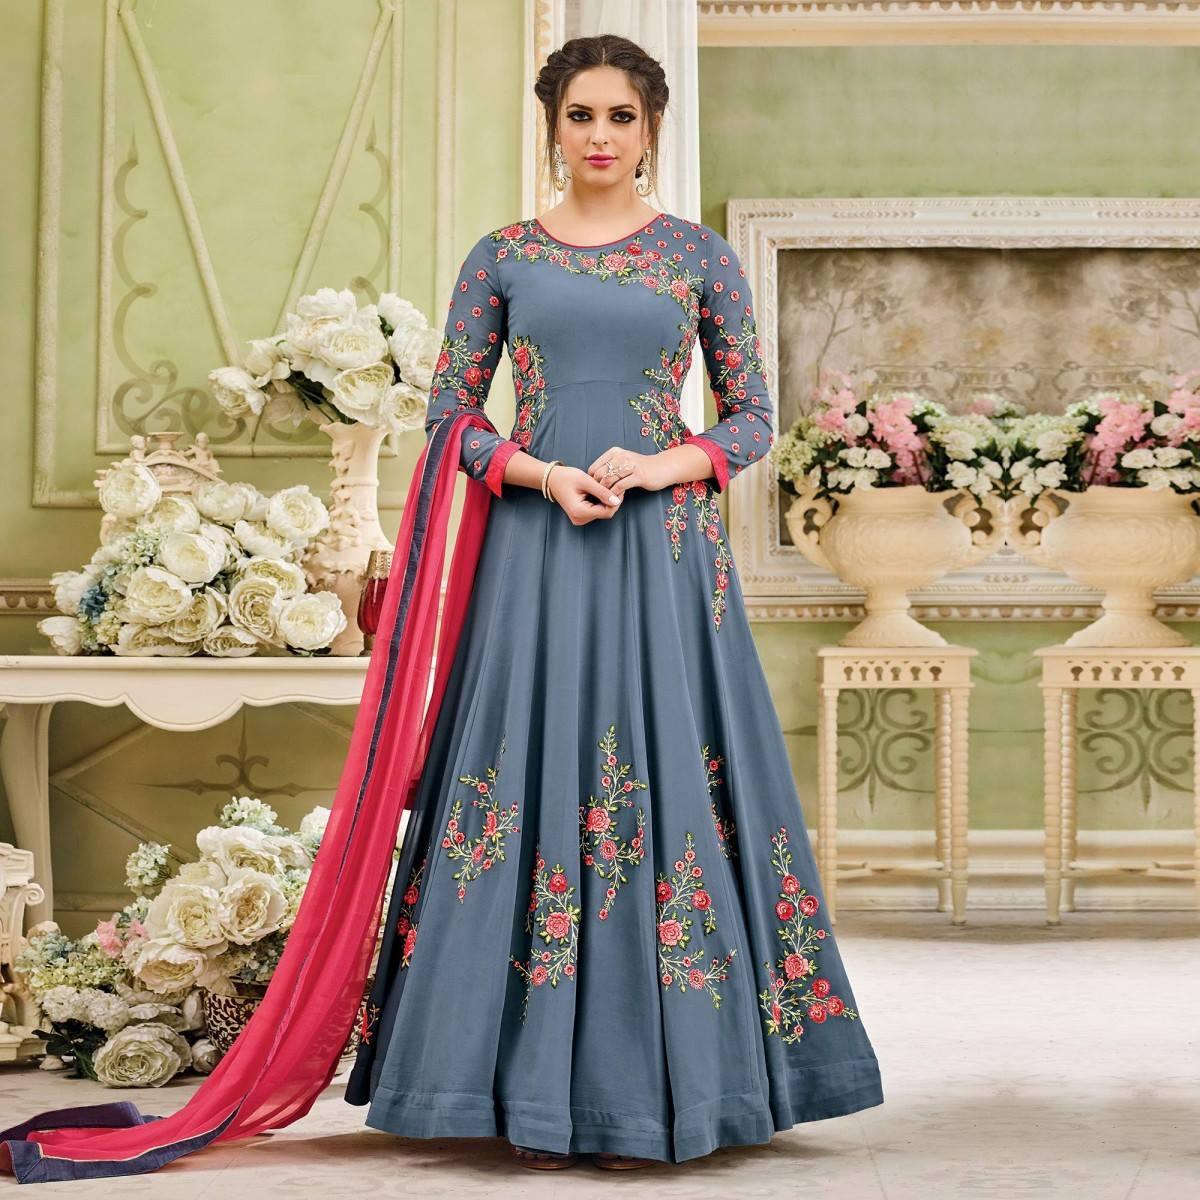 YASH GALLERY Women's Floral Printed Flared Anarkali Dress with Jacket –  Yash Gallery